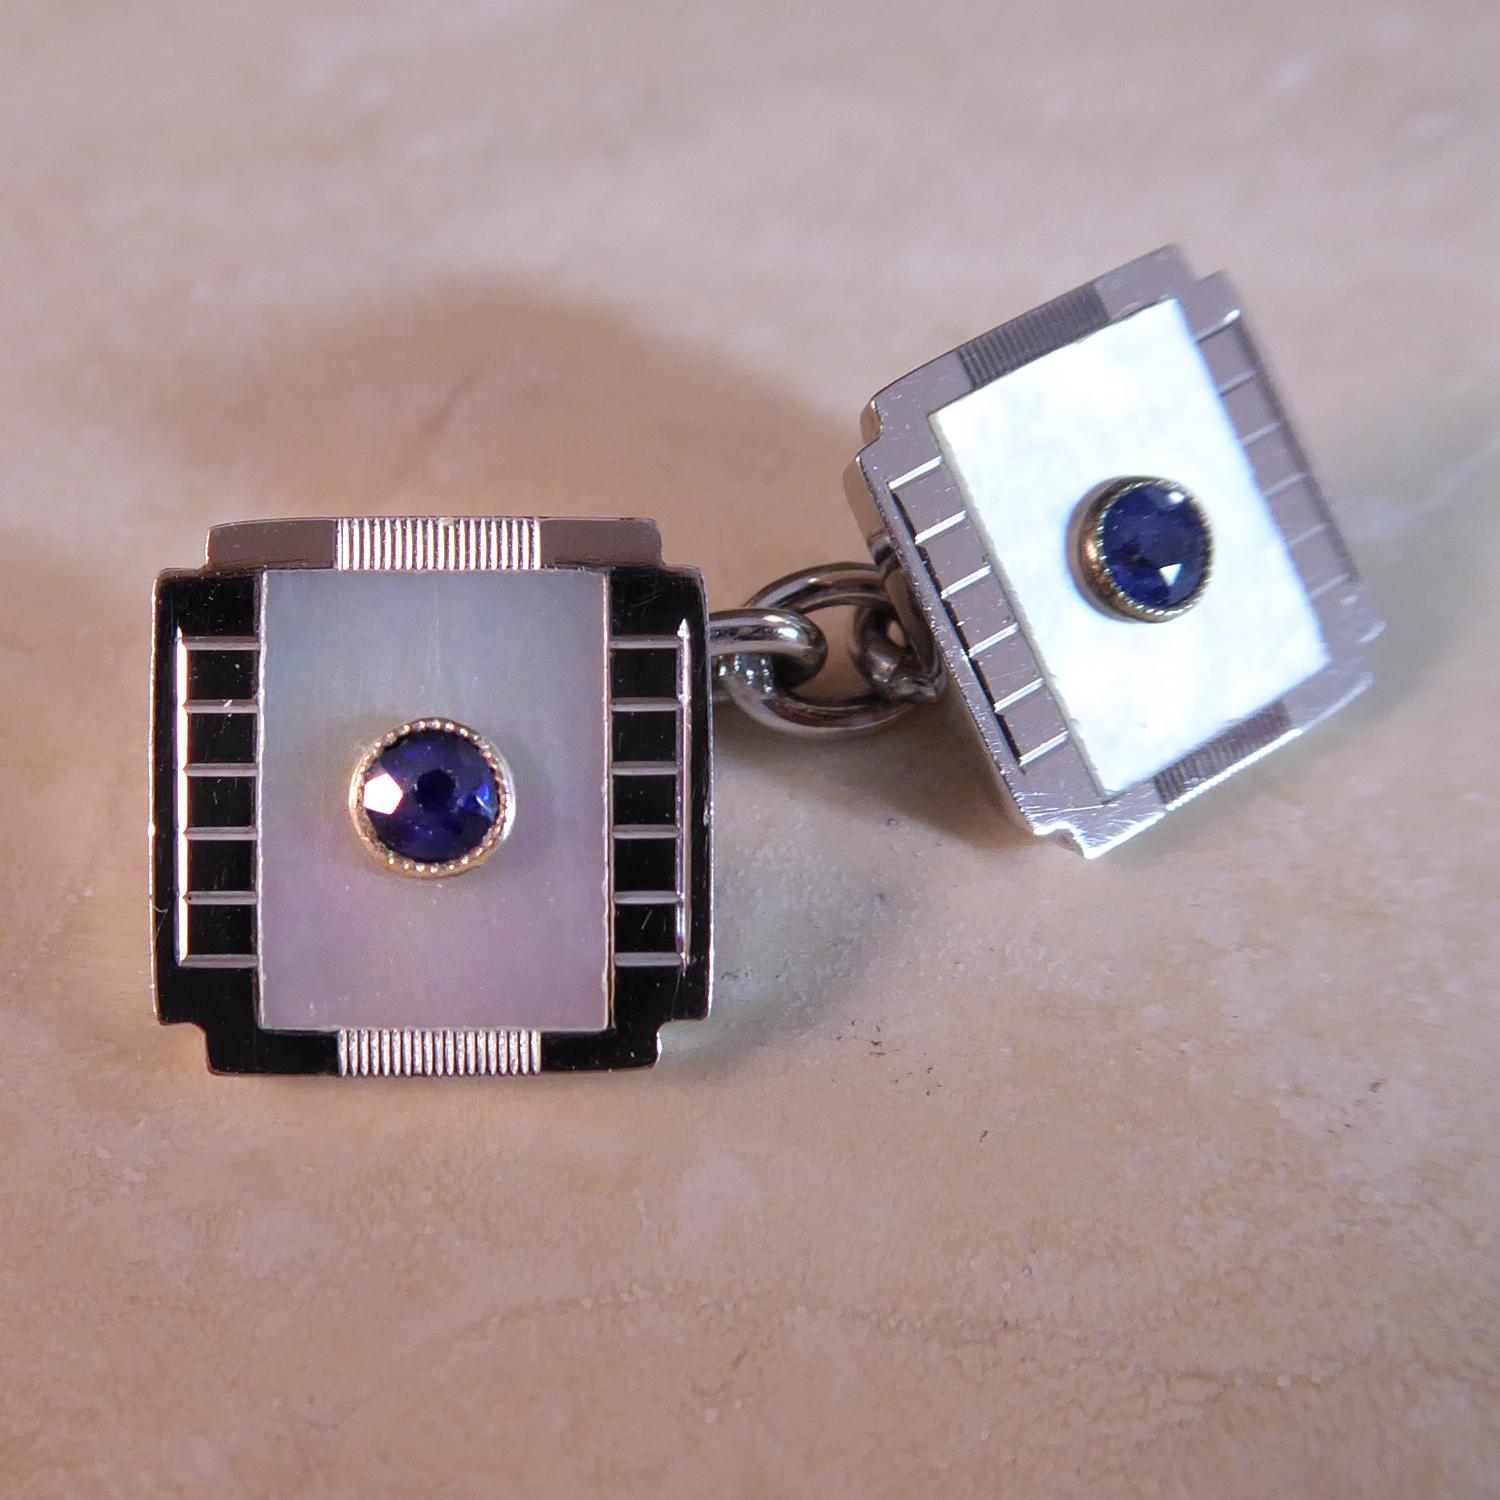 Men's Art Deco Sapphire and Mother of Pearl Cufflinks, White Gold, circa 1920s